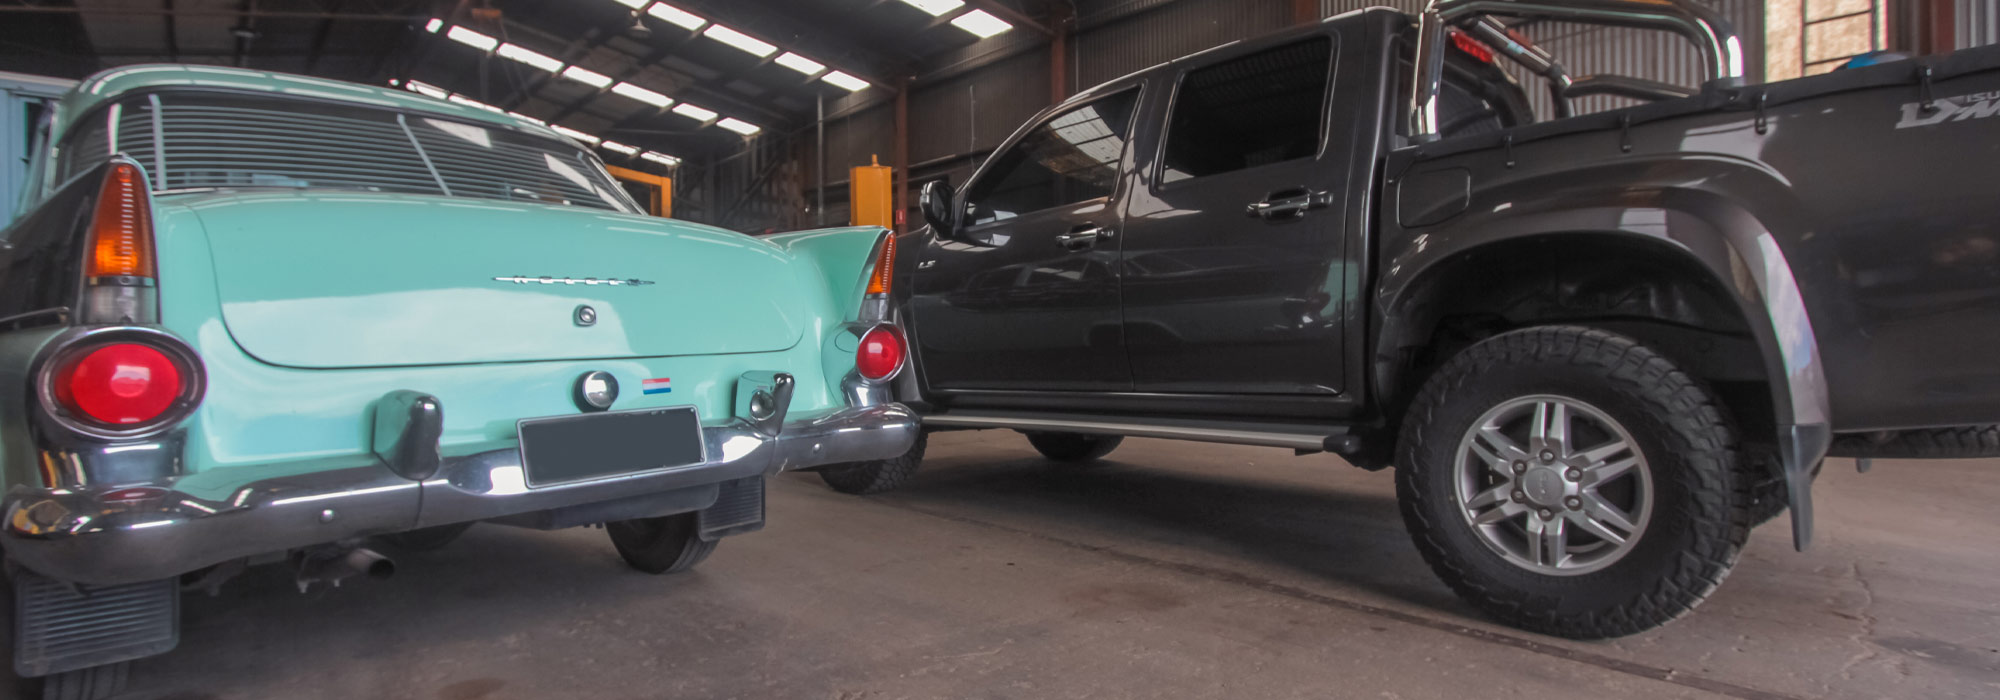 Photo of the rear of an aqua coloured classic car and beside it a twin cab ute that is charcoal colour.